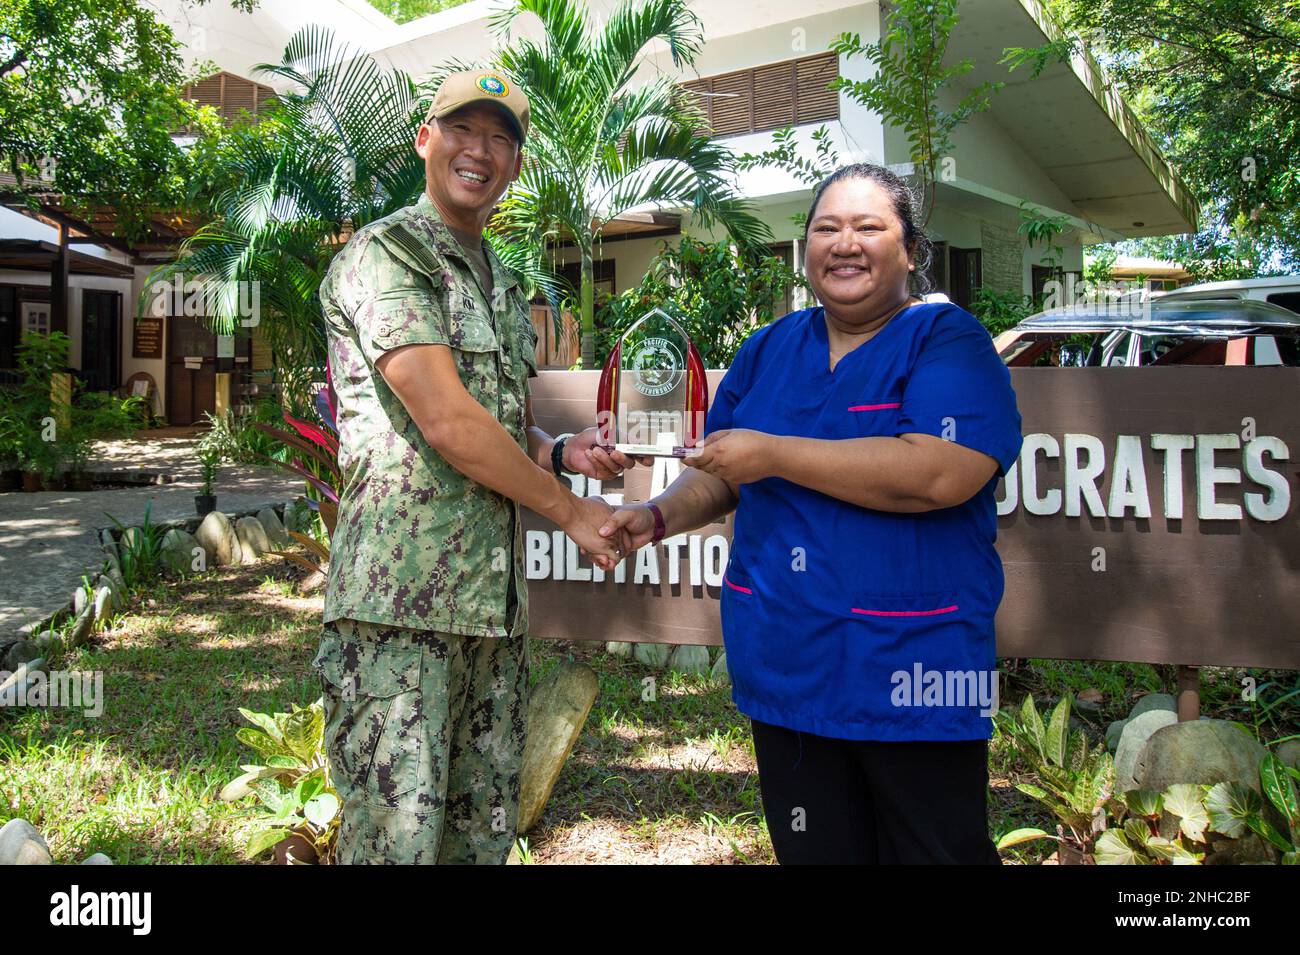 PUERTO PRINCESA, Philippines (July 28, 2022) — Capt. Hank Kim, Pacific Partnership 2022 (PP22) mission commander, left, presents a plaque to Angelica Muyco-Dantes, a physical therapist at the Dr. Jose Antonio Socrates Rehabilitation Center, during PP22. Now in its 17th year, Pacific Partnership is the largest annual multinational humanitarian assistance and disaster relief preparedness mission conducted in the Indo-Pacific. Stock Photo